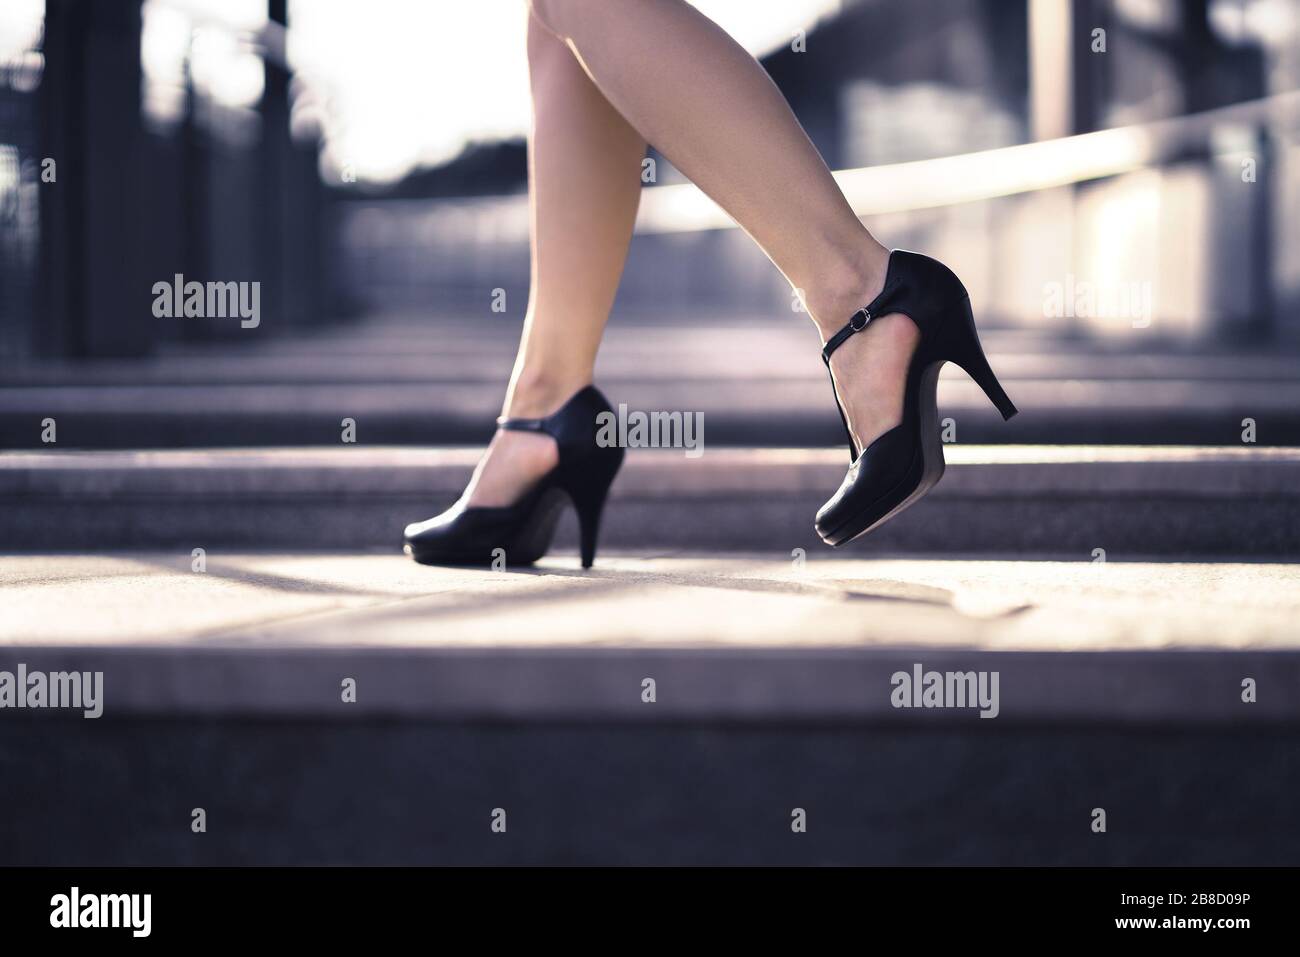 Woman walking in high heels in urban city street in summer. Chic stylish footwear. Elegant fashion style. Business lady with sexy stiletto shoes. Stock Photo